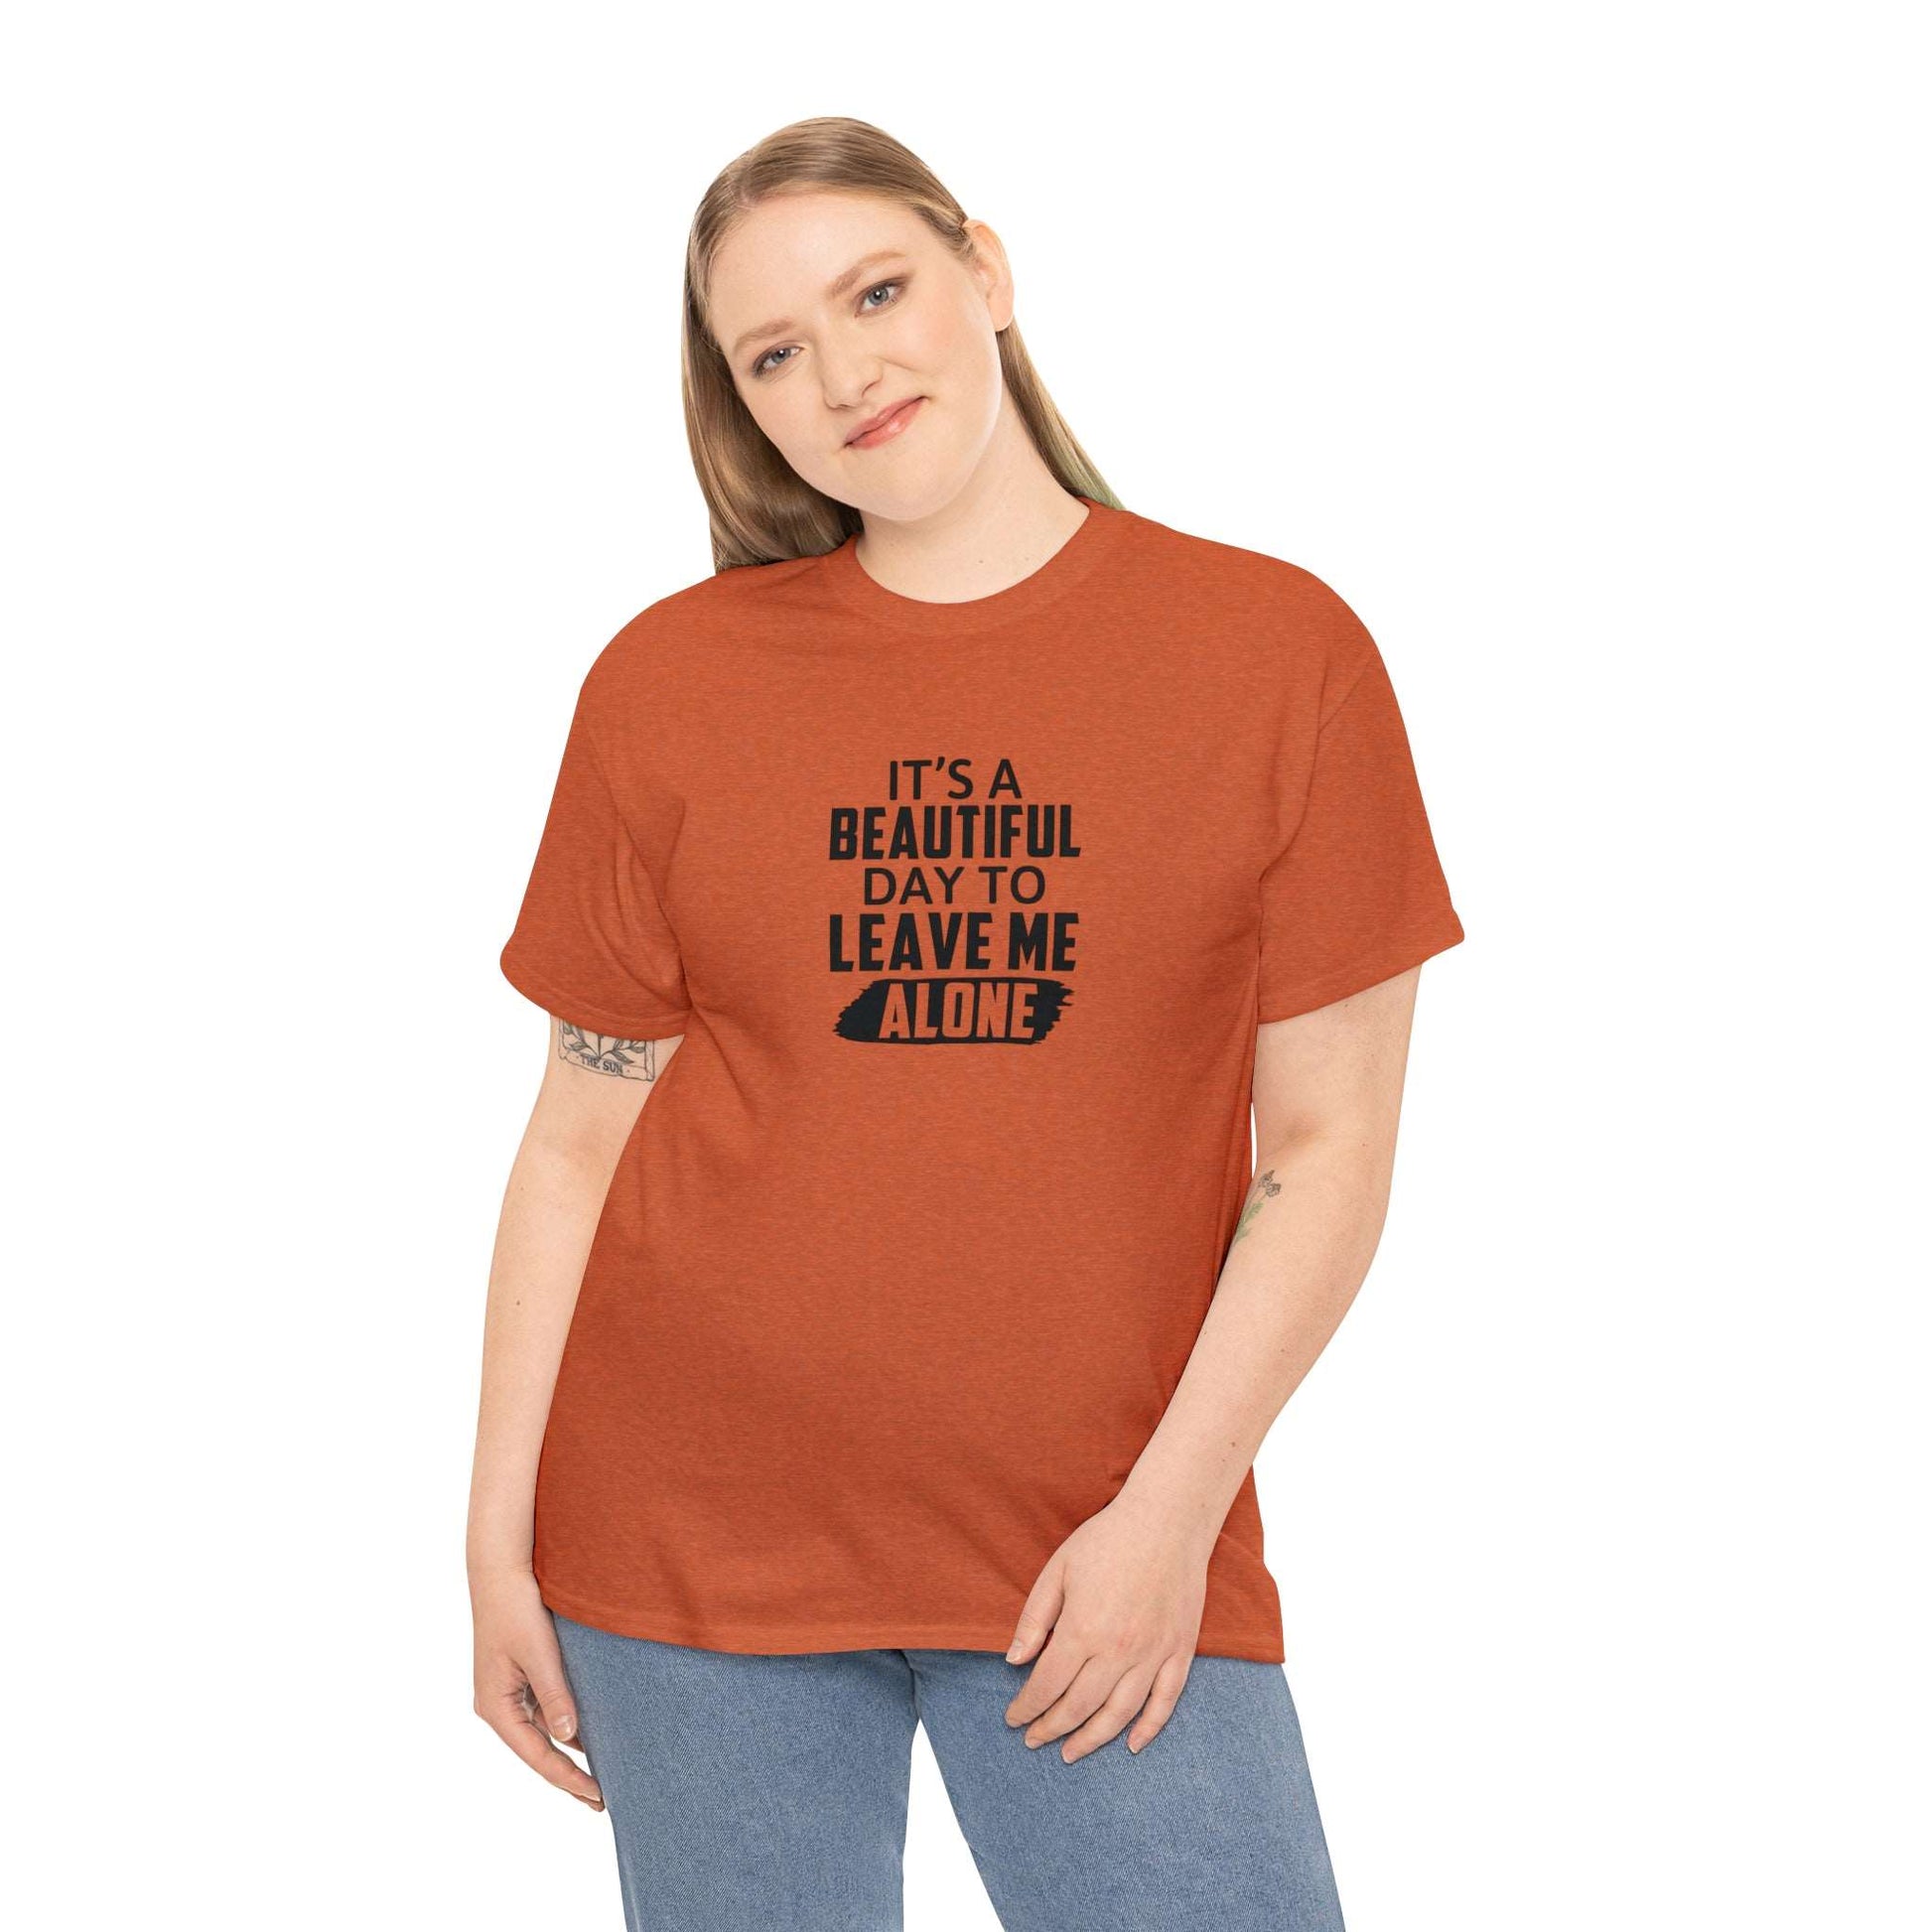 Leave Me Alone Cotton Tee